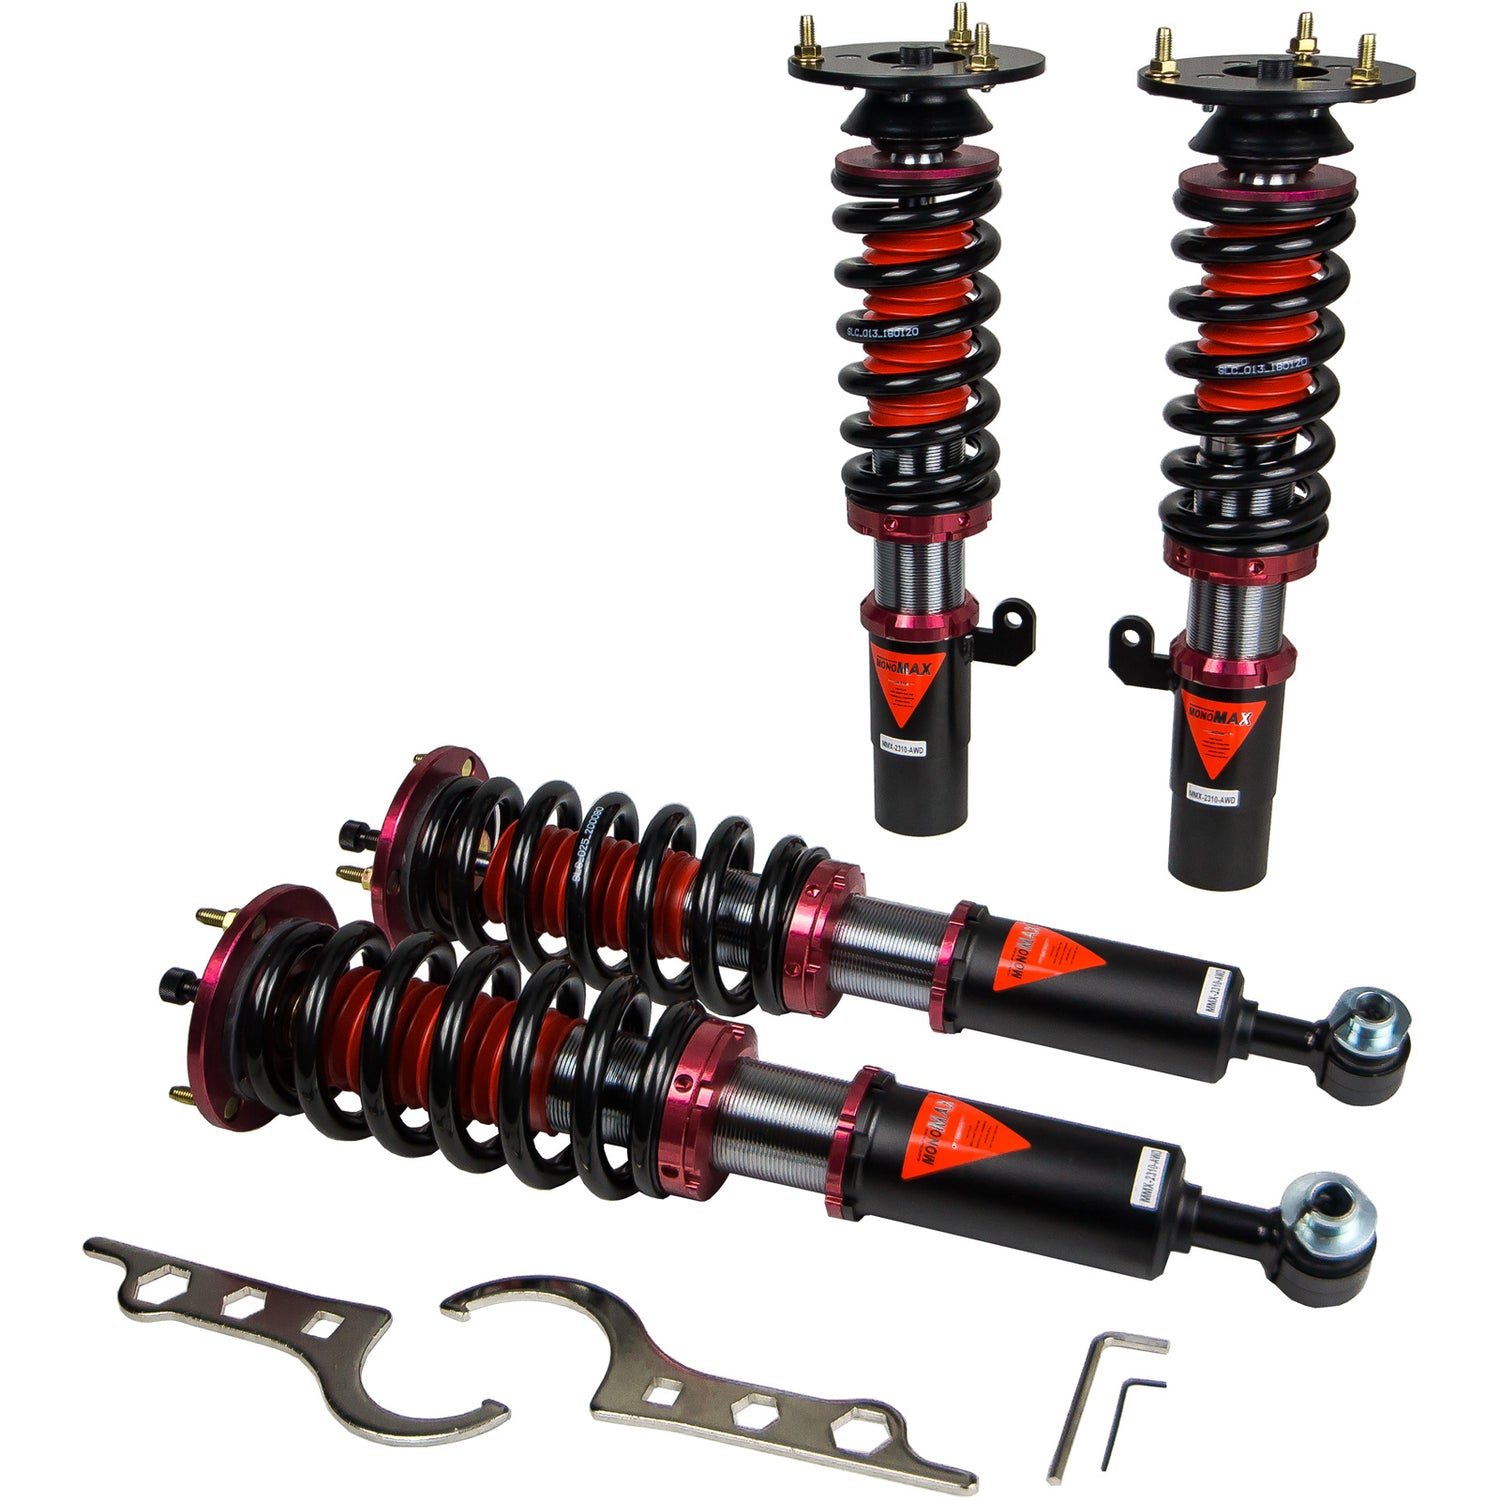 MMX2310-AWD MAXX Coilovers Lowering Kit, Fully Adjustable, Ride Height, 40 Clicks Rebound Settings, BMW 5-Series(E60) 03-10(AWD)